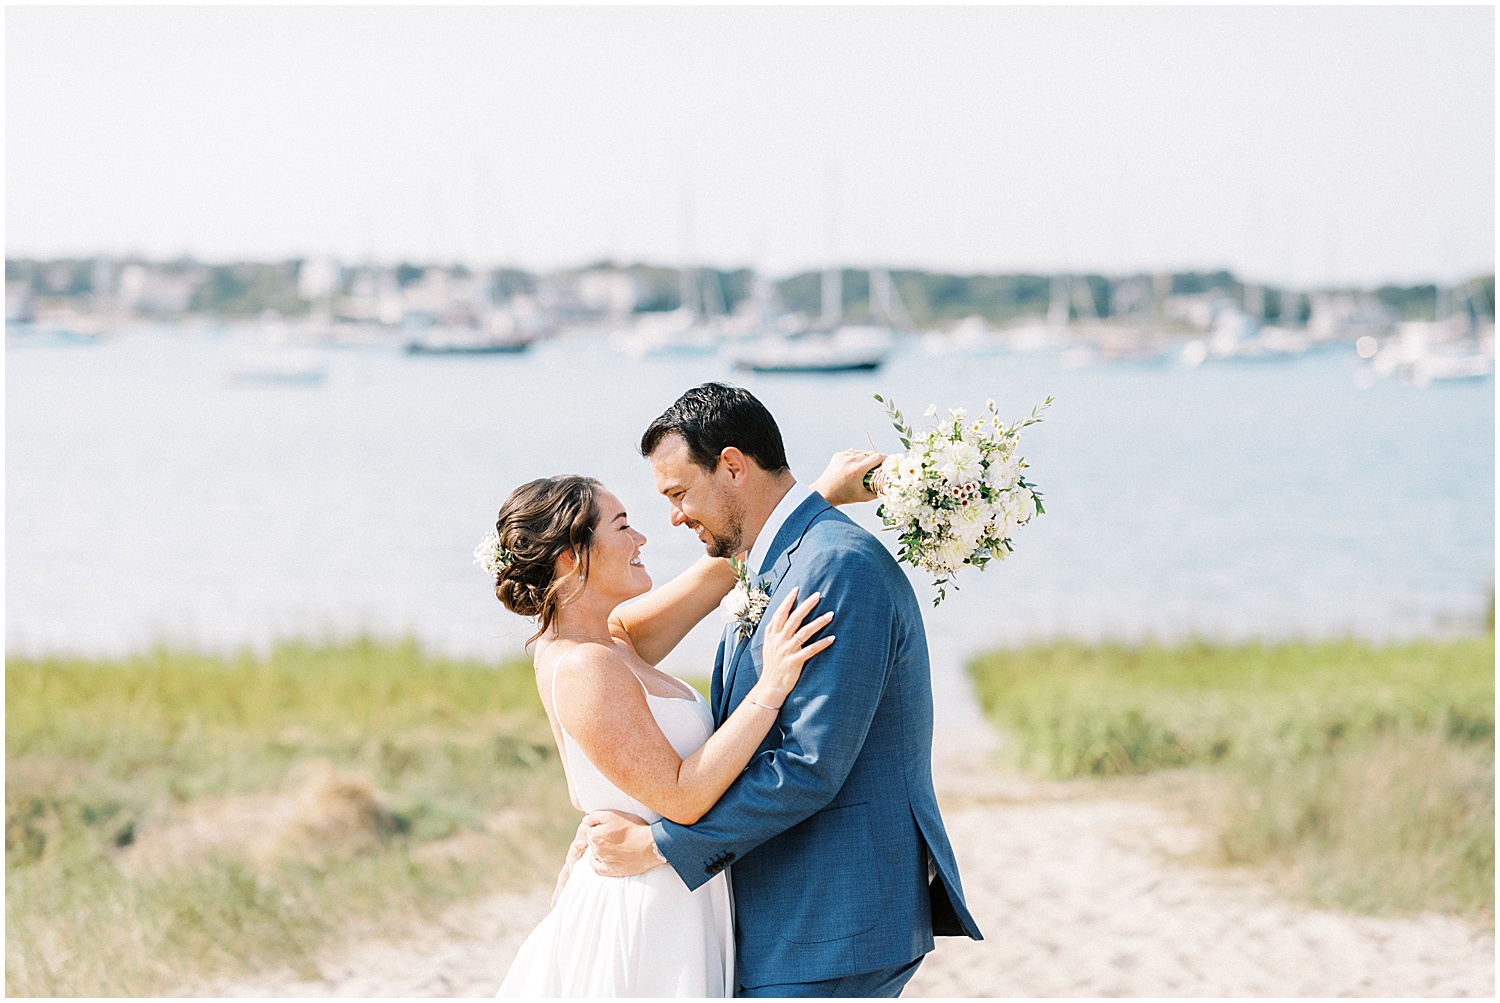 sunny bride and groom beach portrait in Chatham on Cape Cod